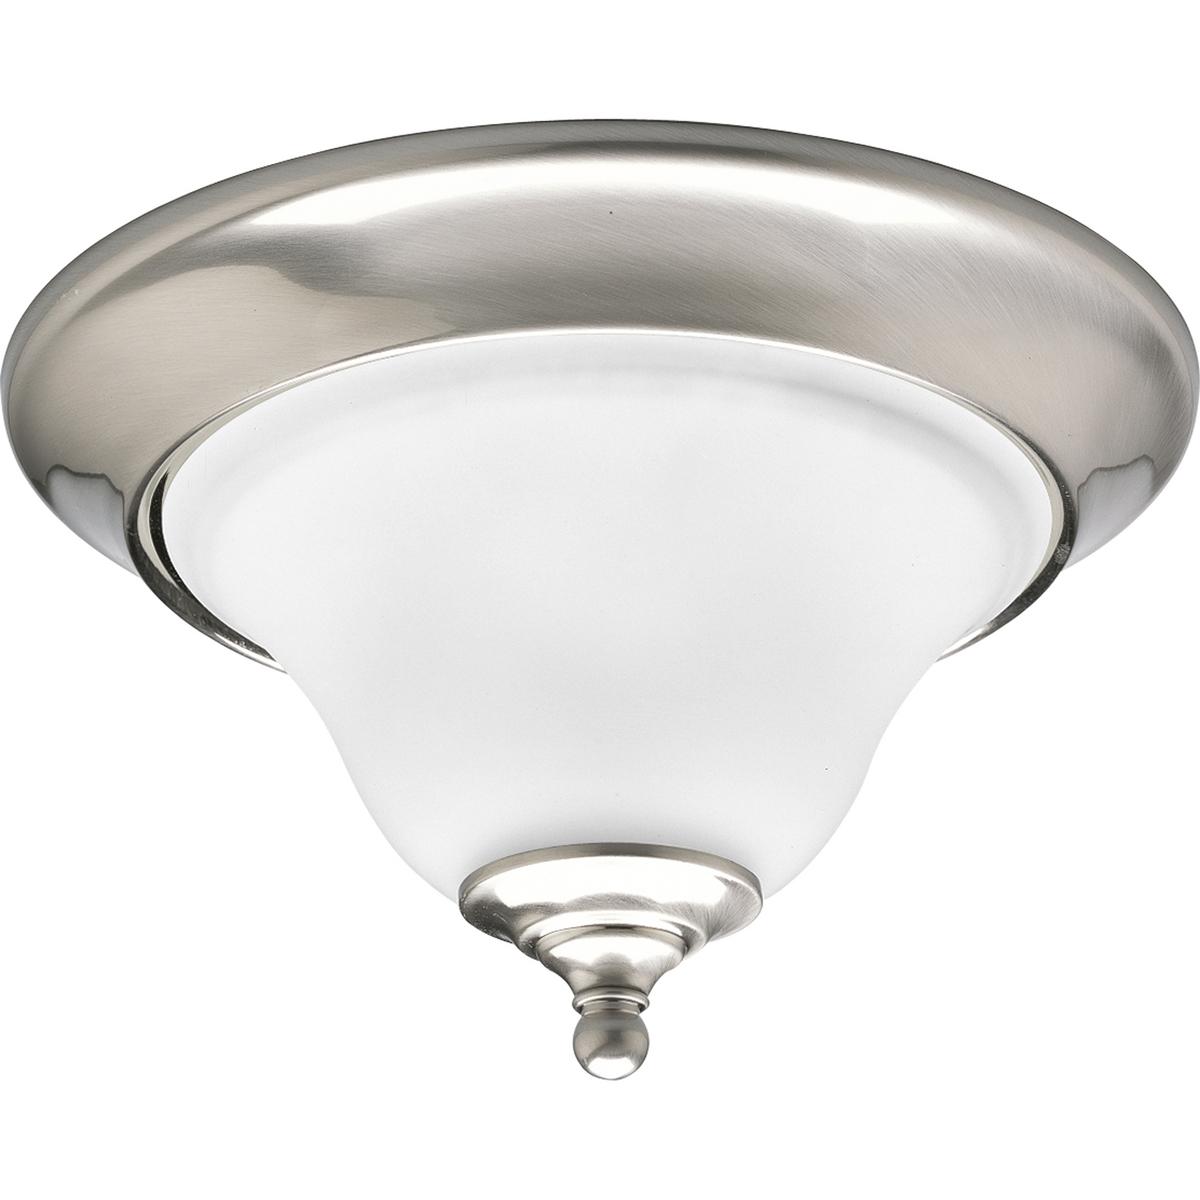 Hubbell P3475-09 One-light close-to-ceiling fixture featuring soft angles, curving lines and etched glass shades. Gracefully exotic, the Trinity Collection offers classic sophistication for transitional interiors. Sculptural forms of metal and glass are enhanced by a clas